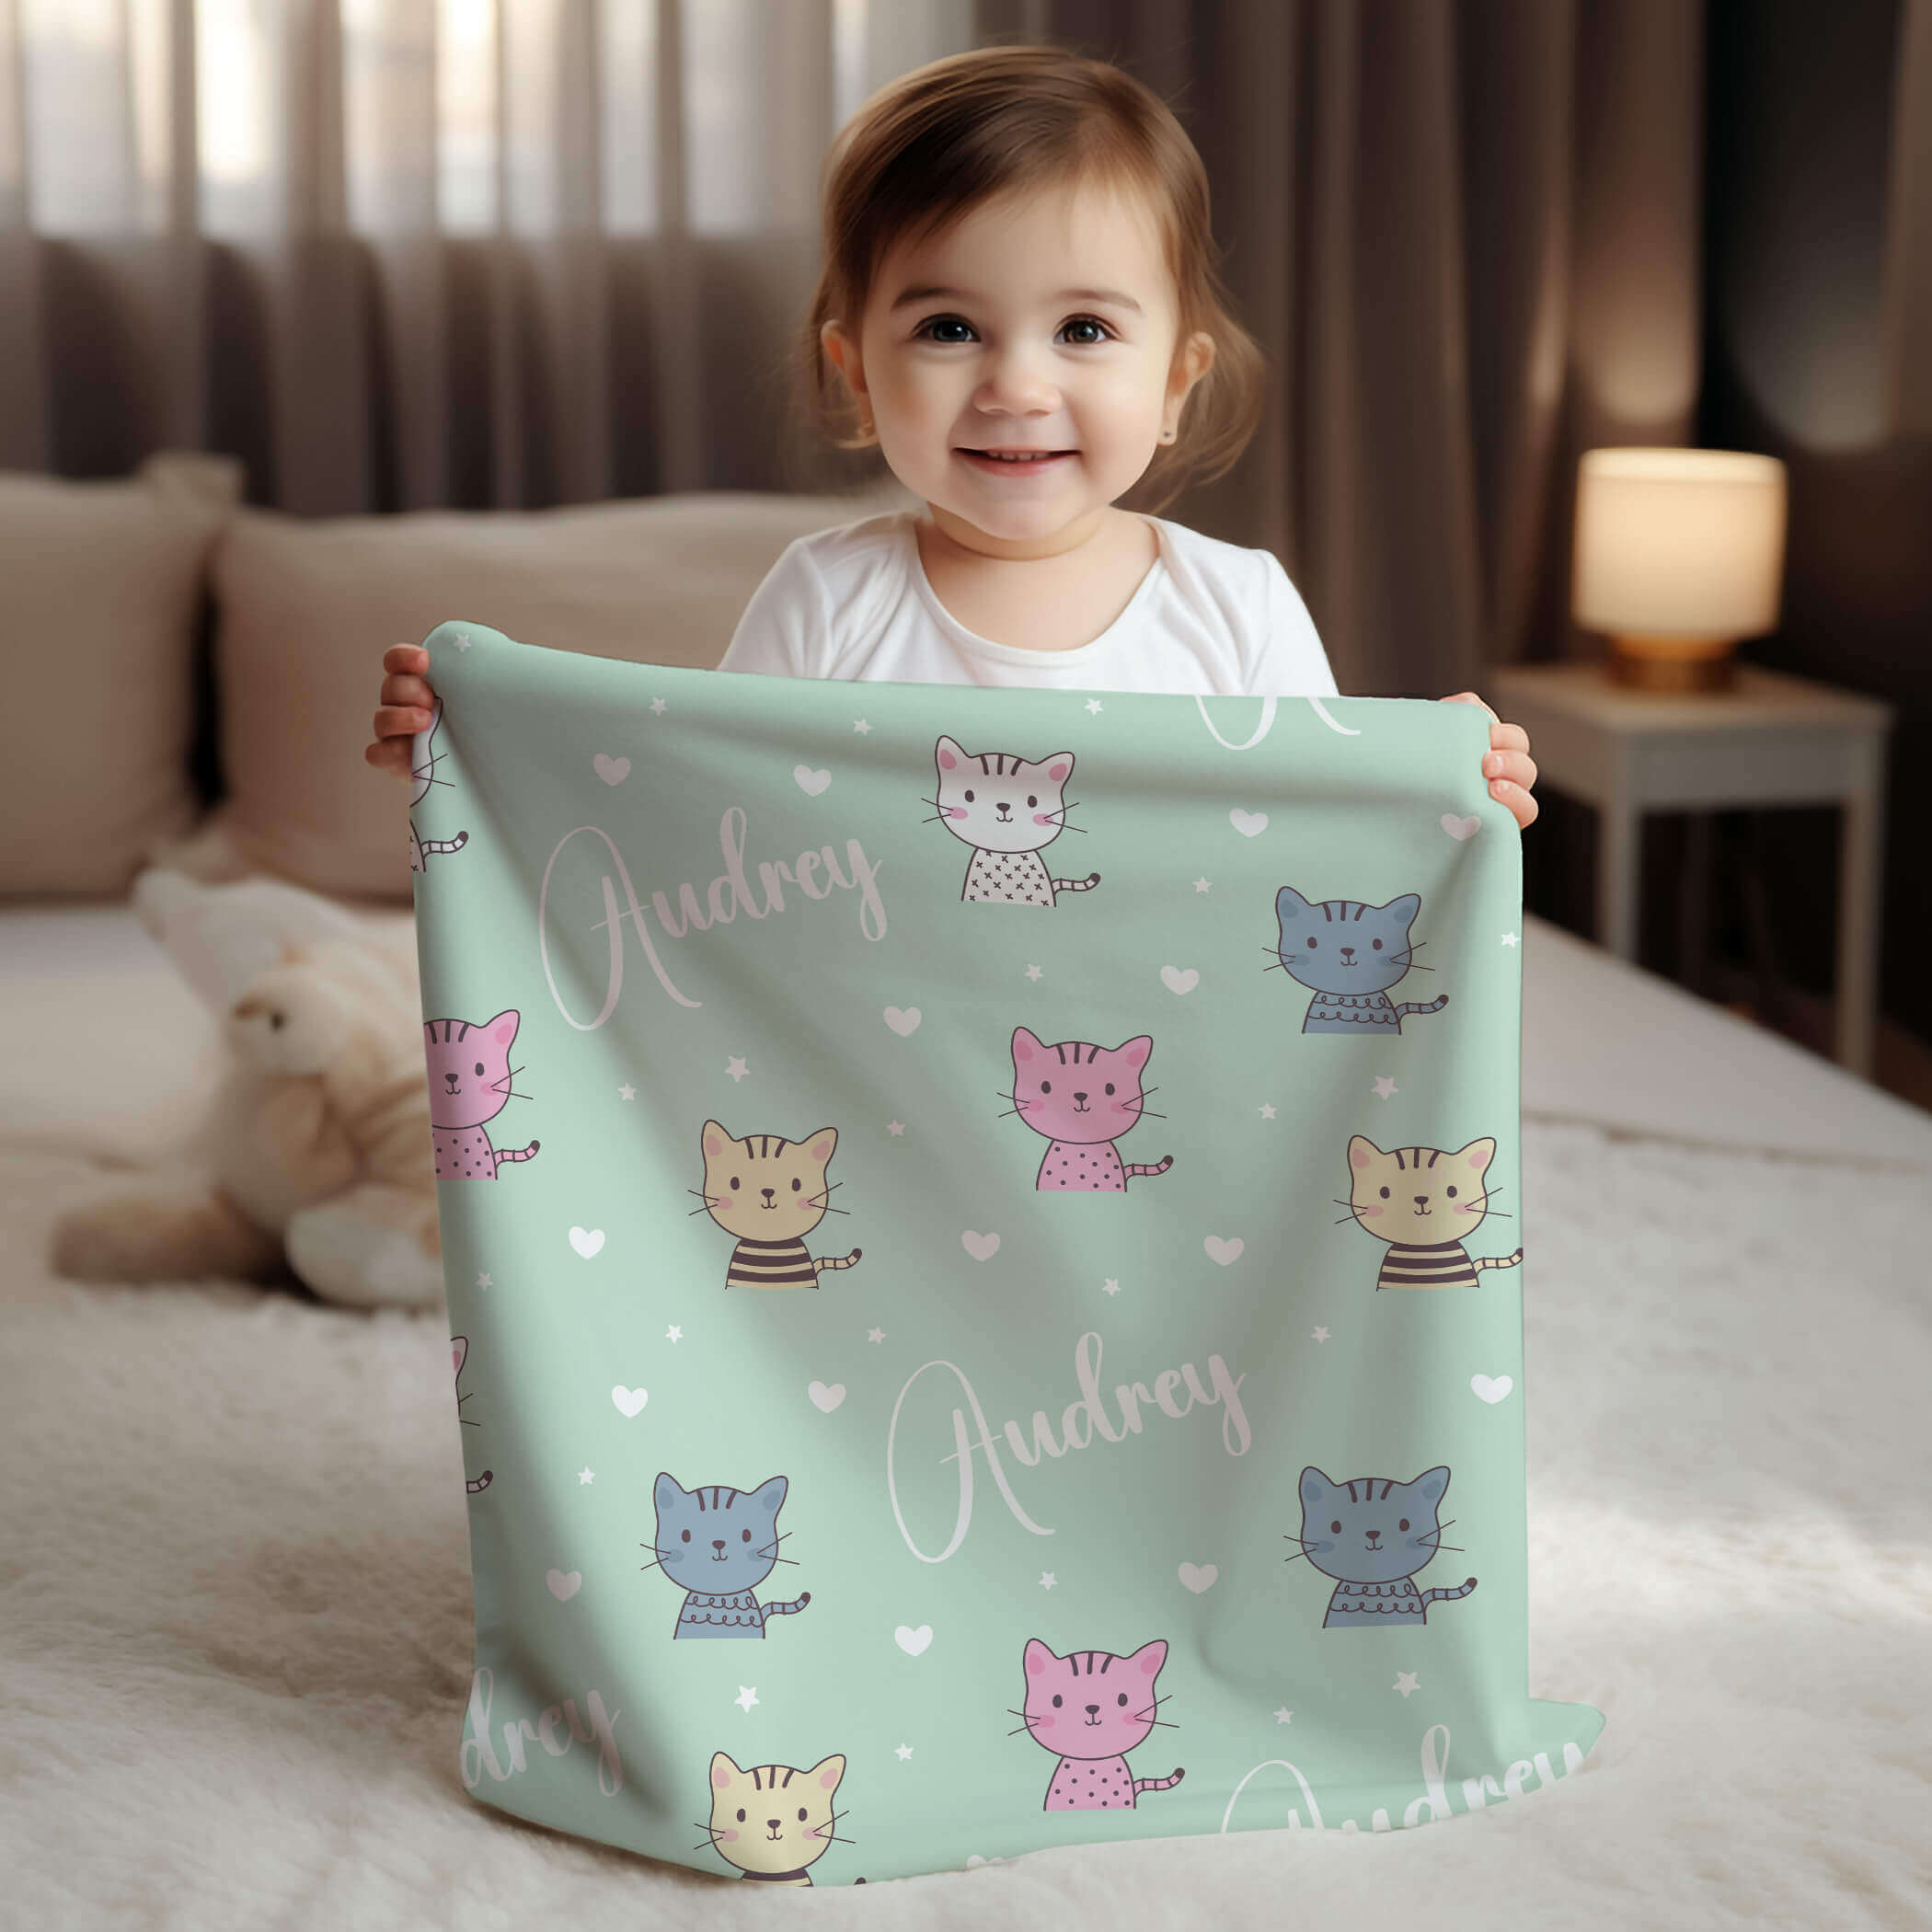 Personalized Name Blanket - Cute Kittens